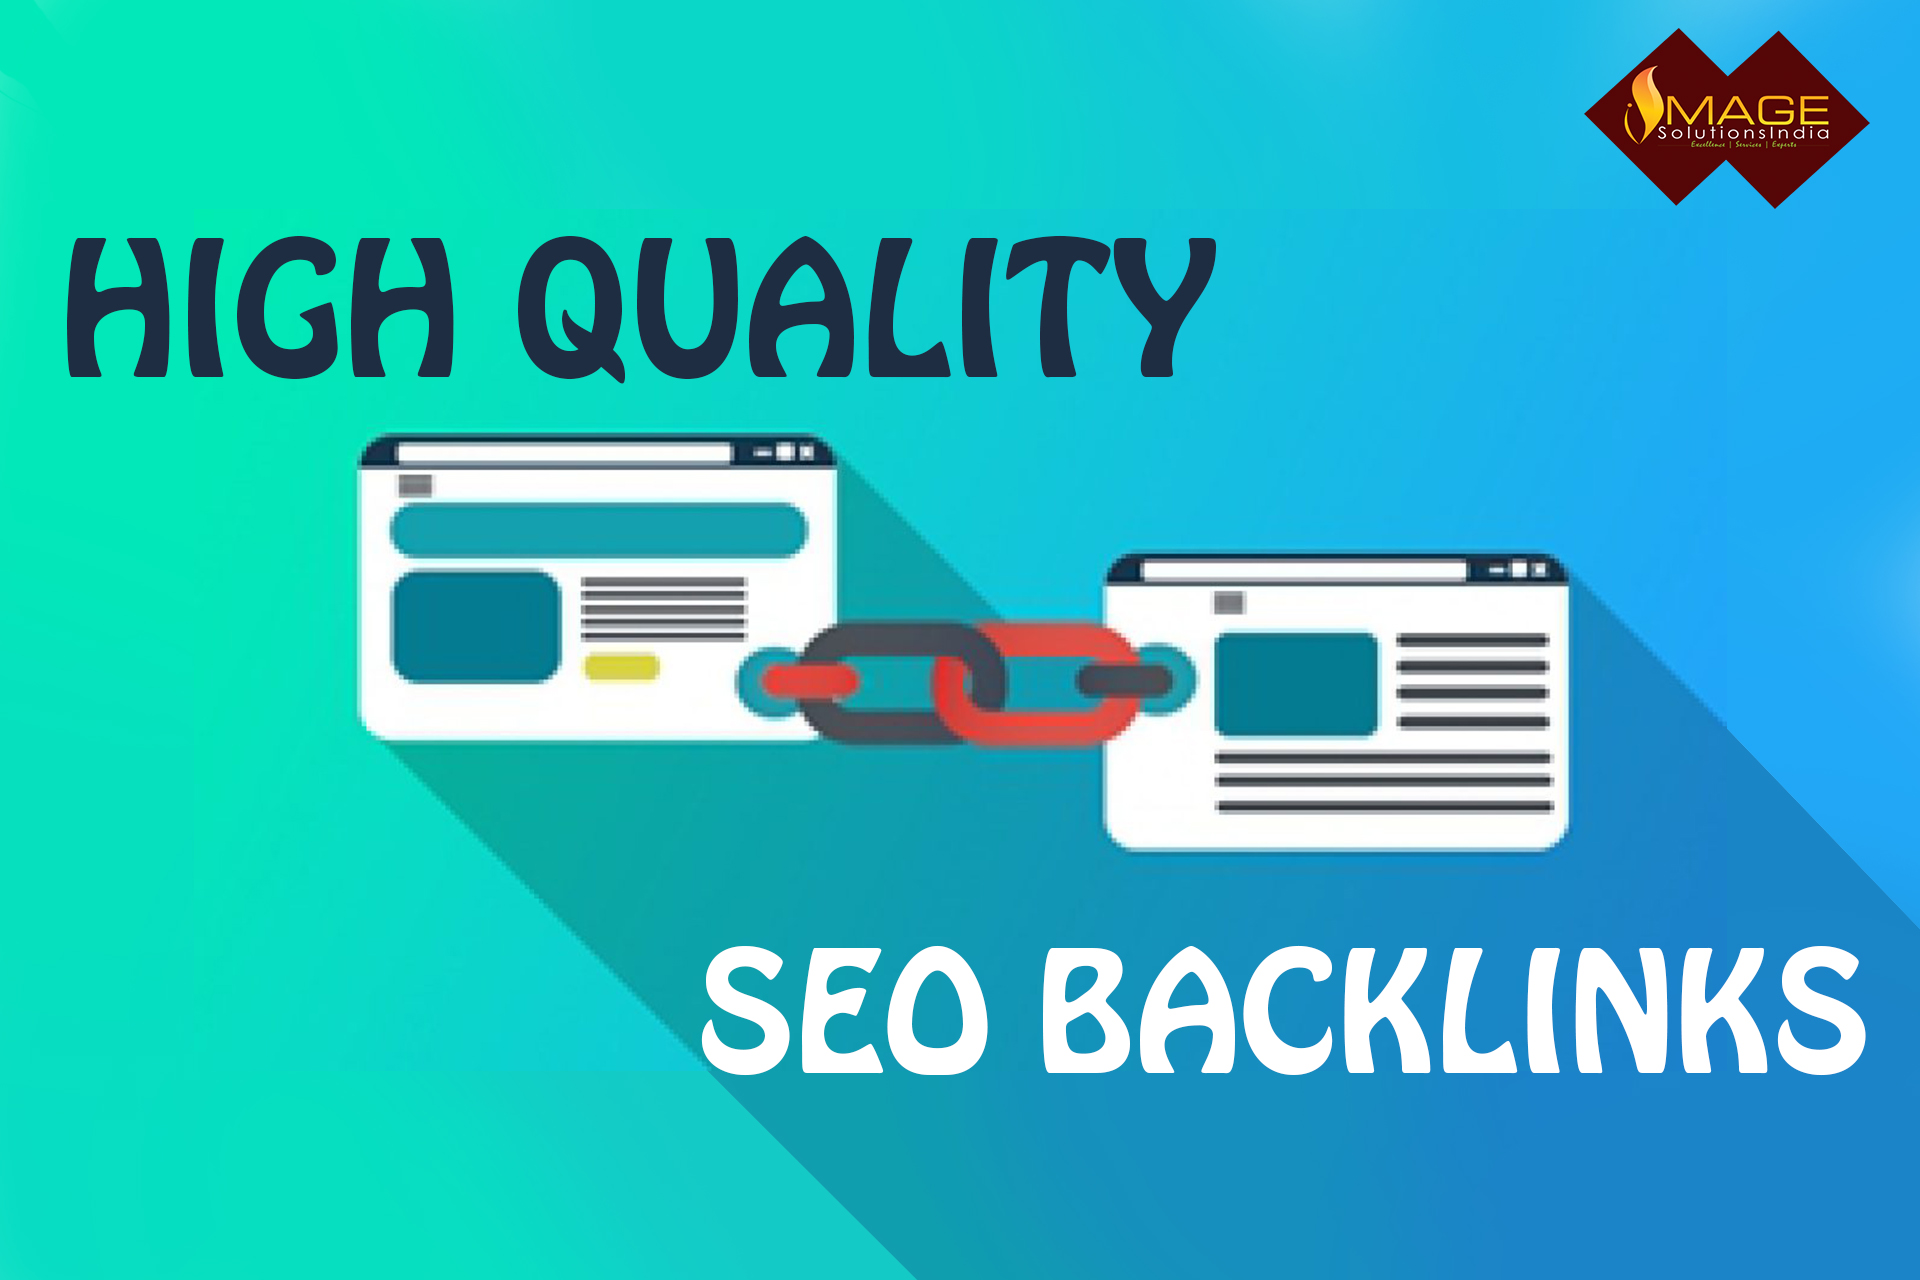 How to Build High-Quality SEO Backlinks on your Website for 2020 - Image Editing Services to UK ...